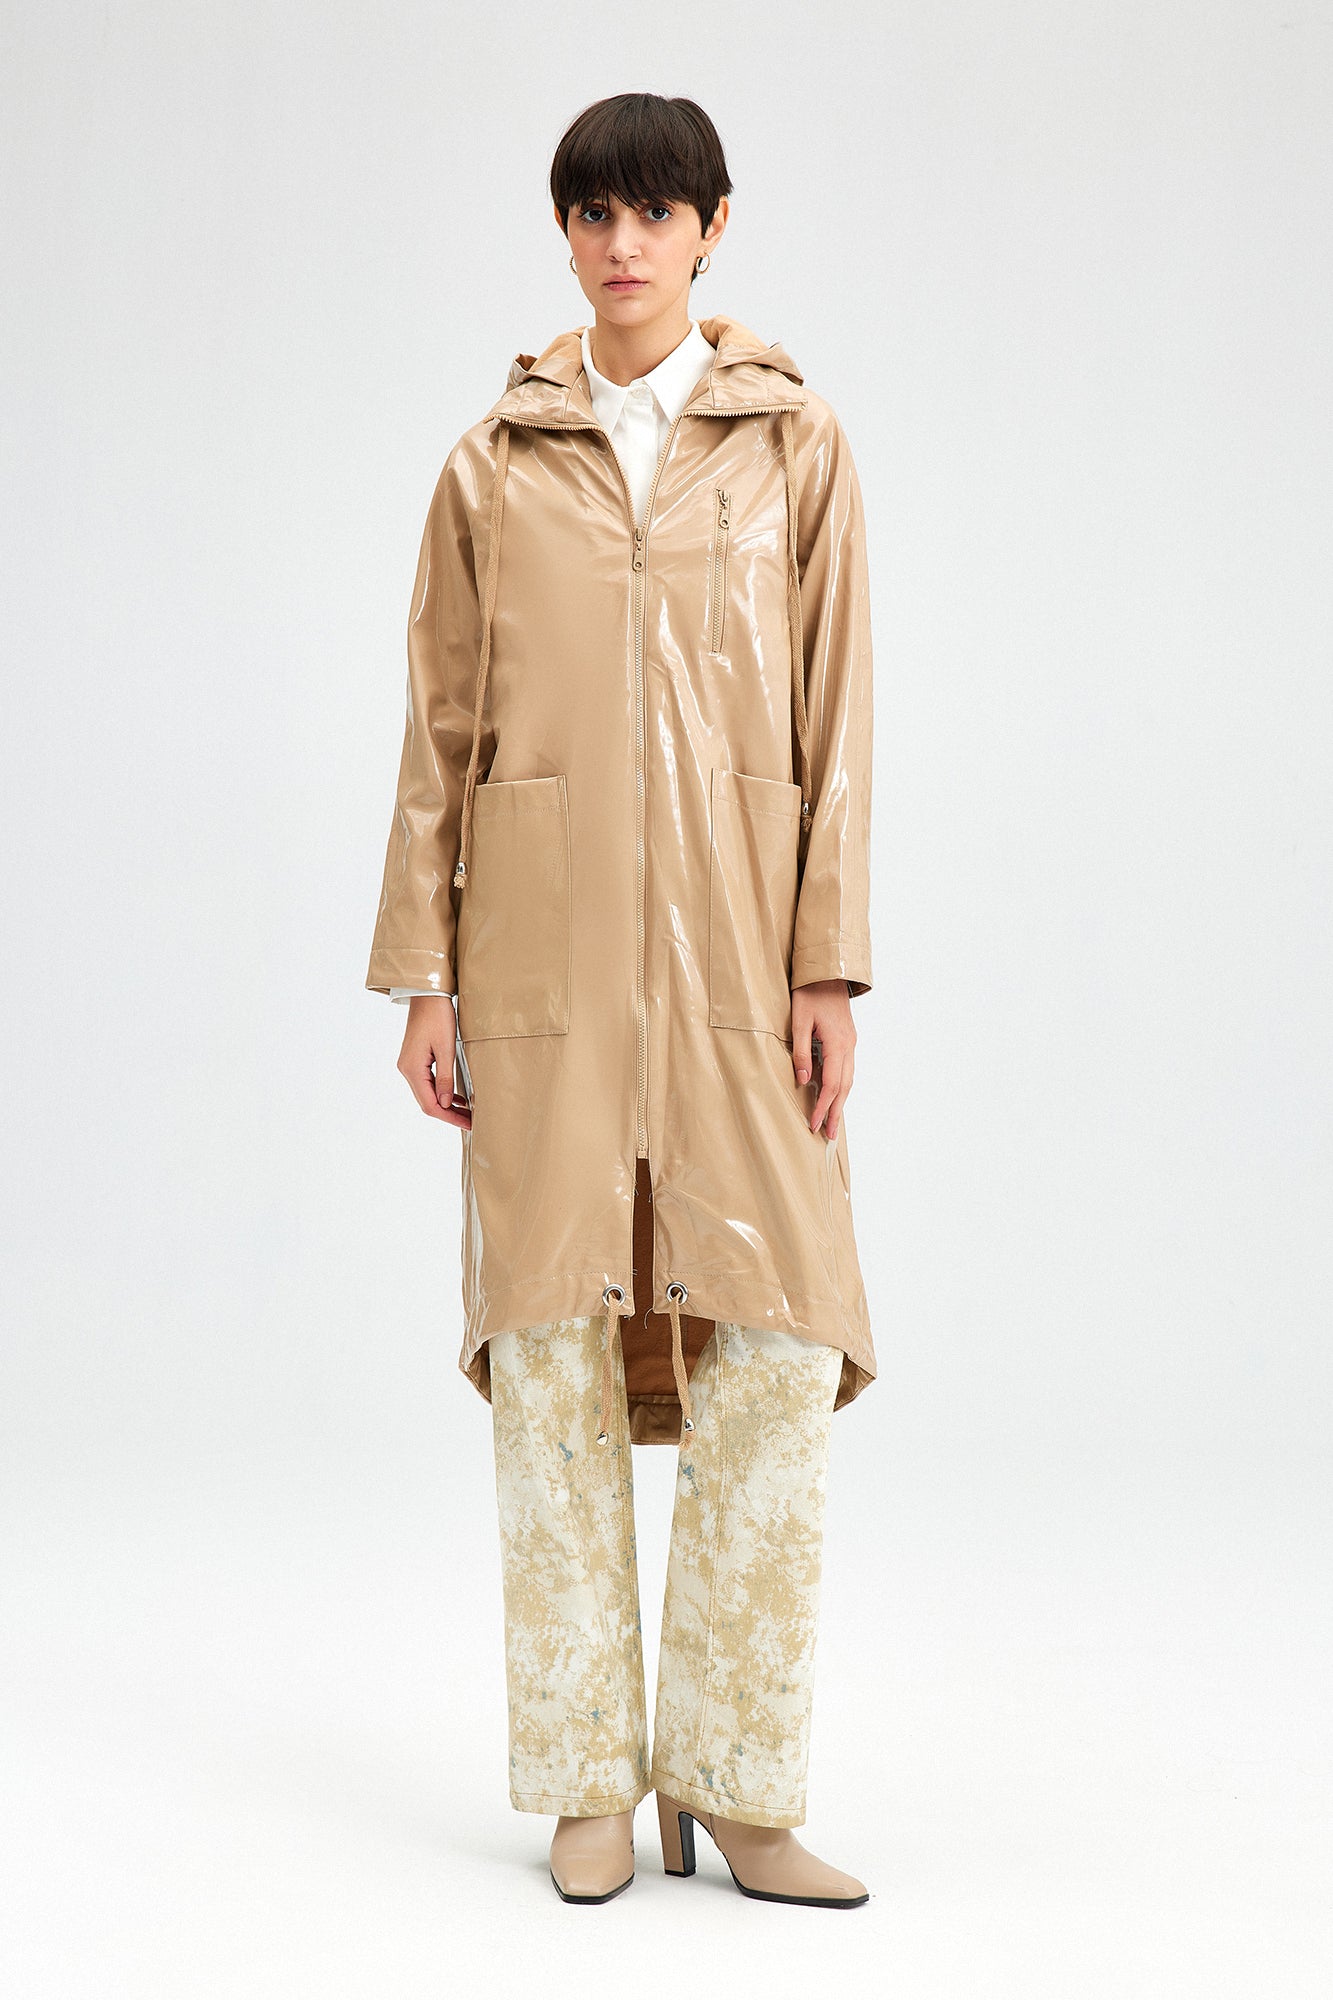 A wholesale clothing model wears Patent Leather Raincoat With Hoodie - Cream, Turkish wholesale Raincoat of Touche Prive